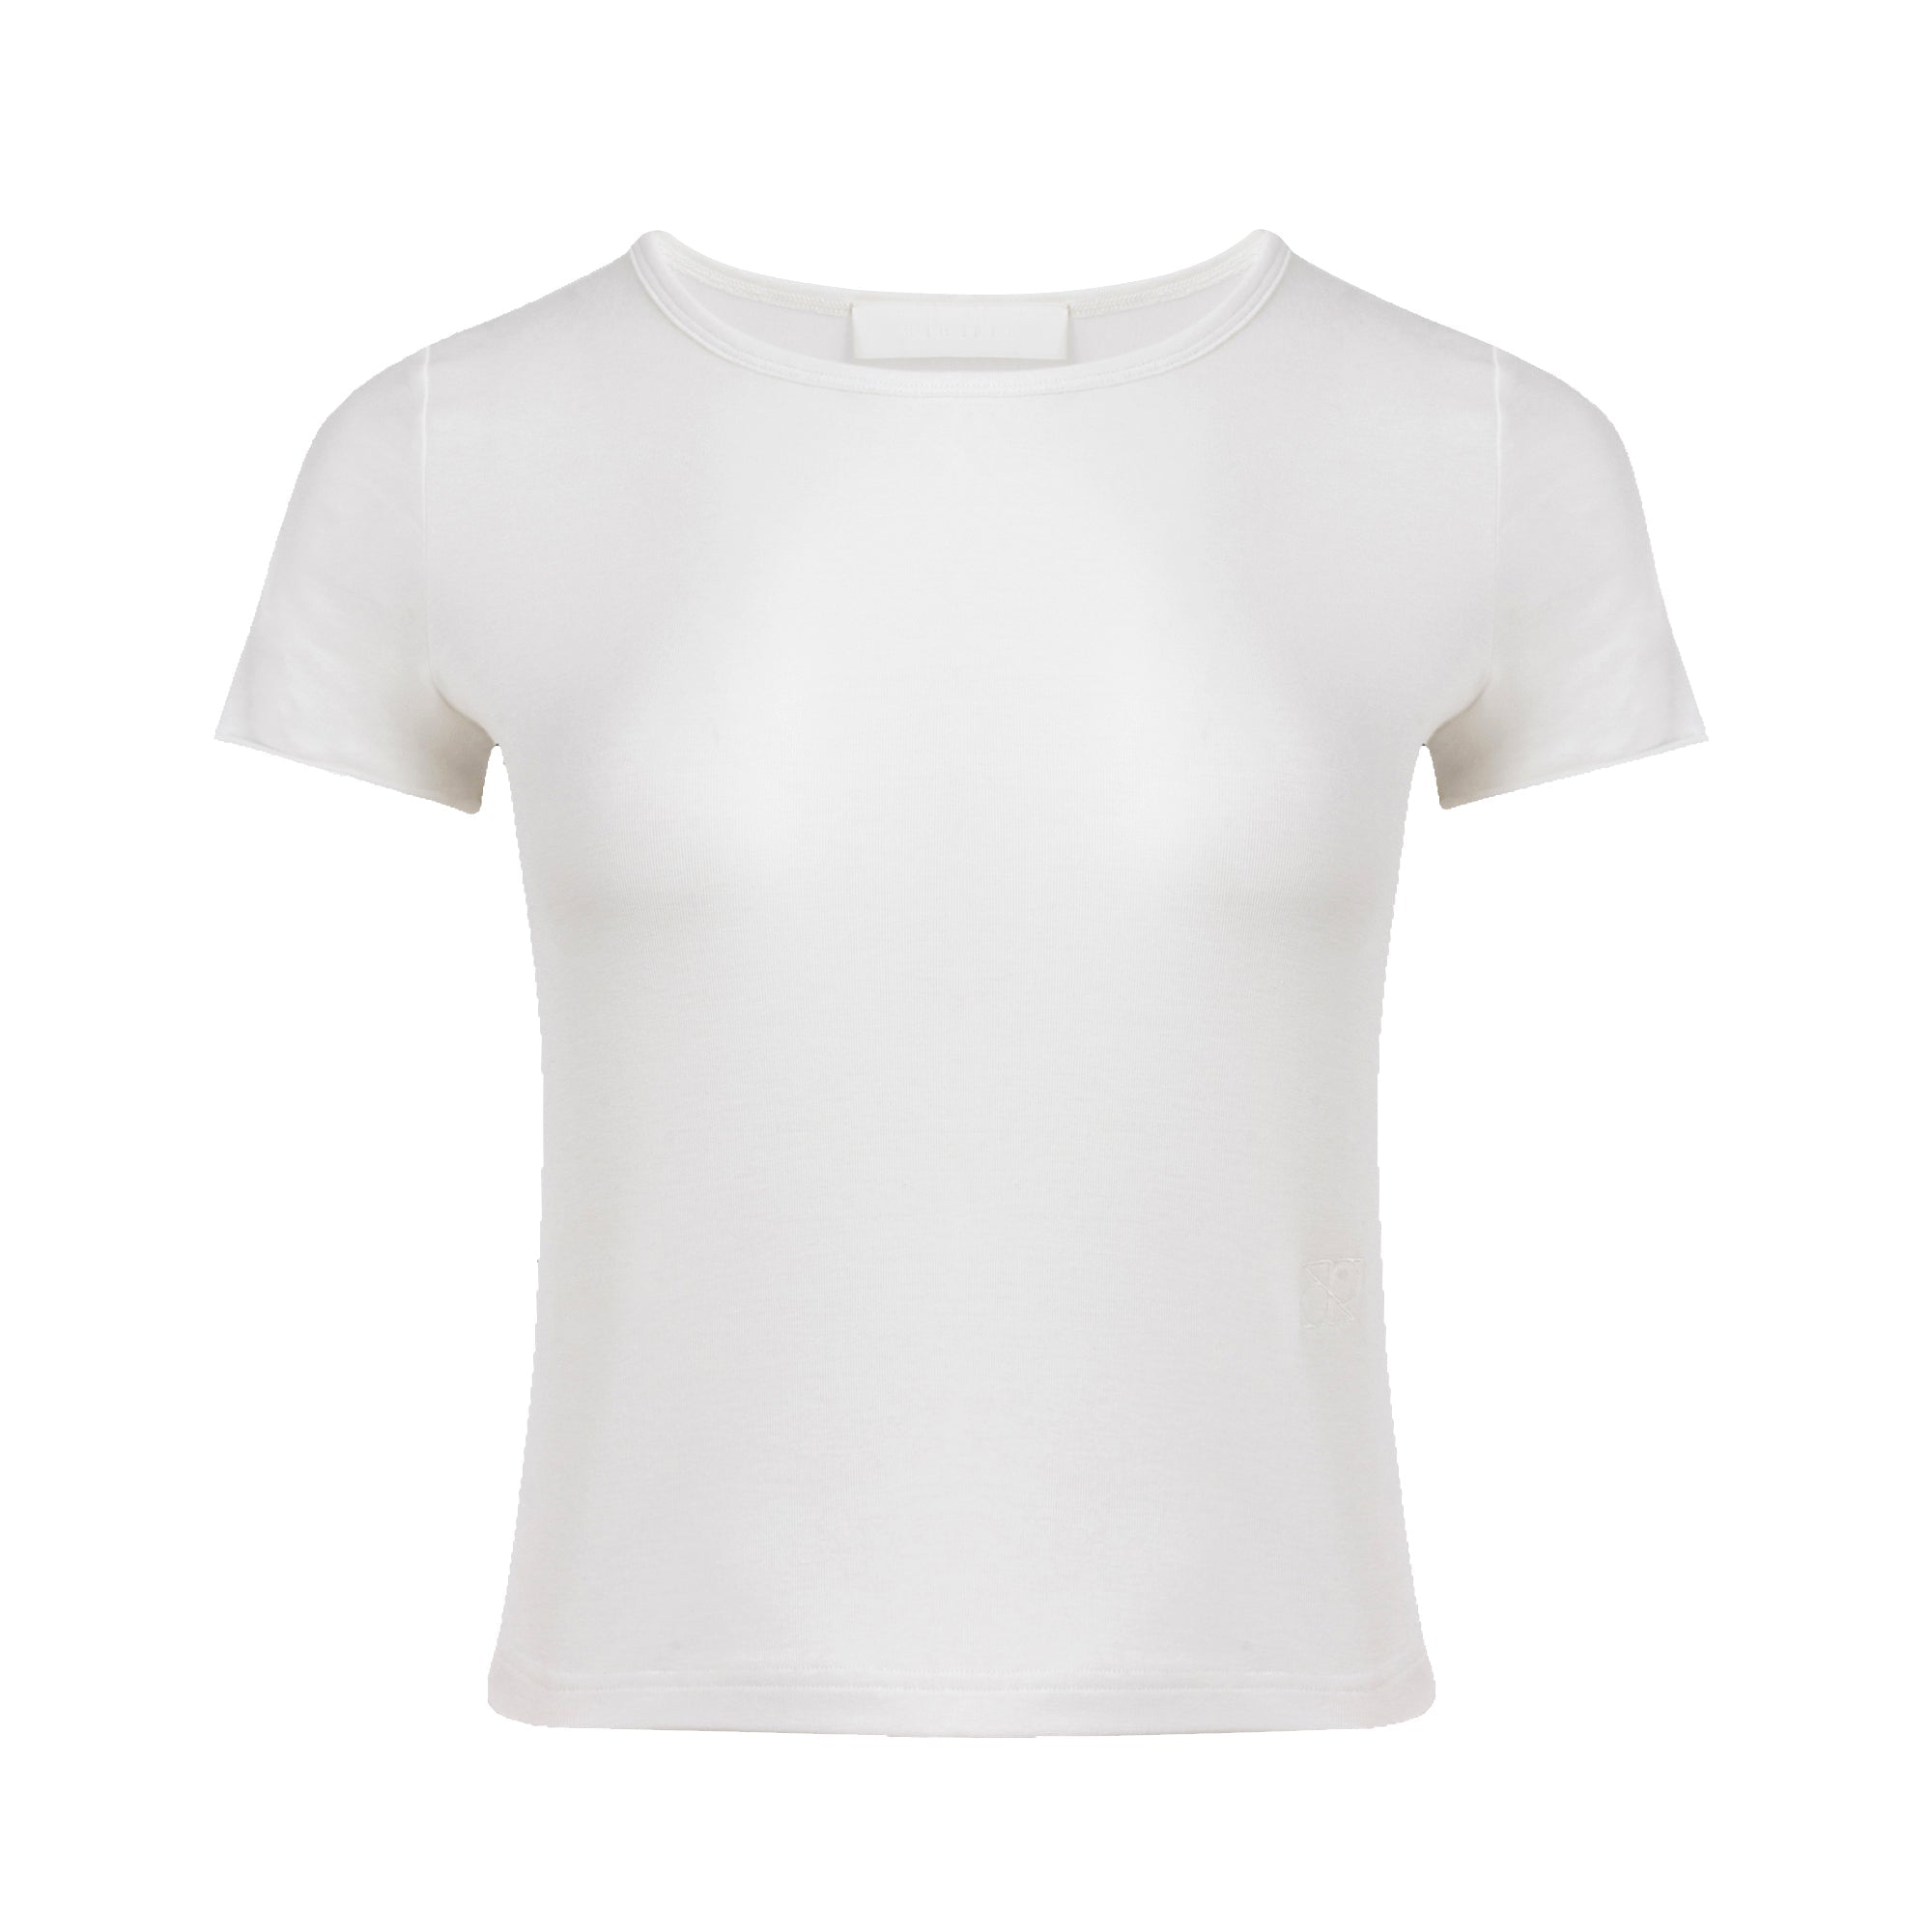 Ther. White Sheer Top | MADA IN CHINA